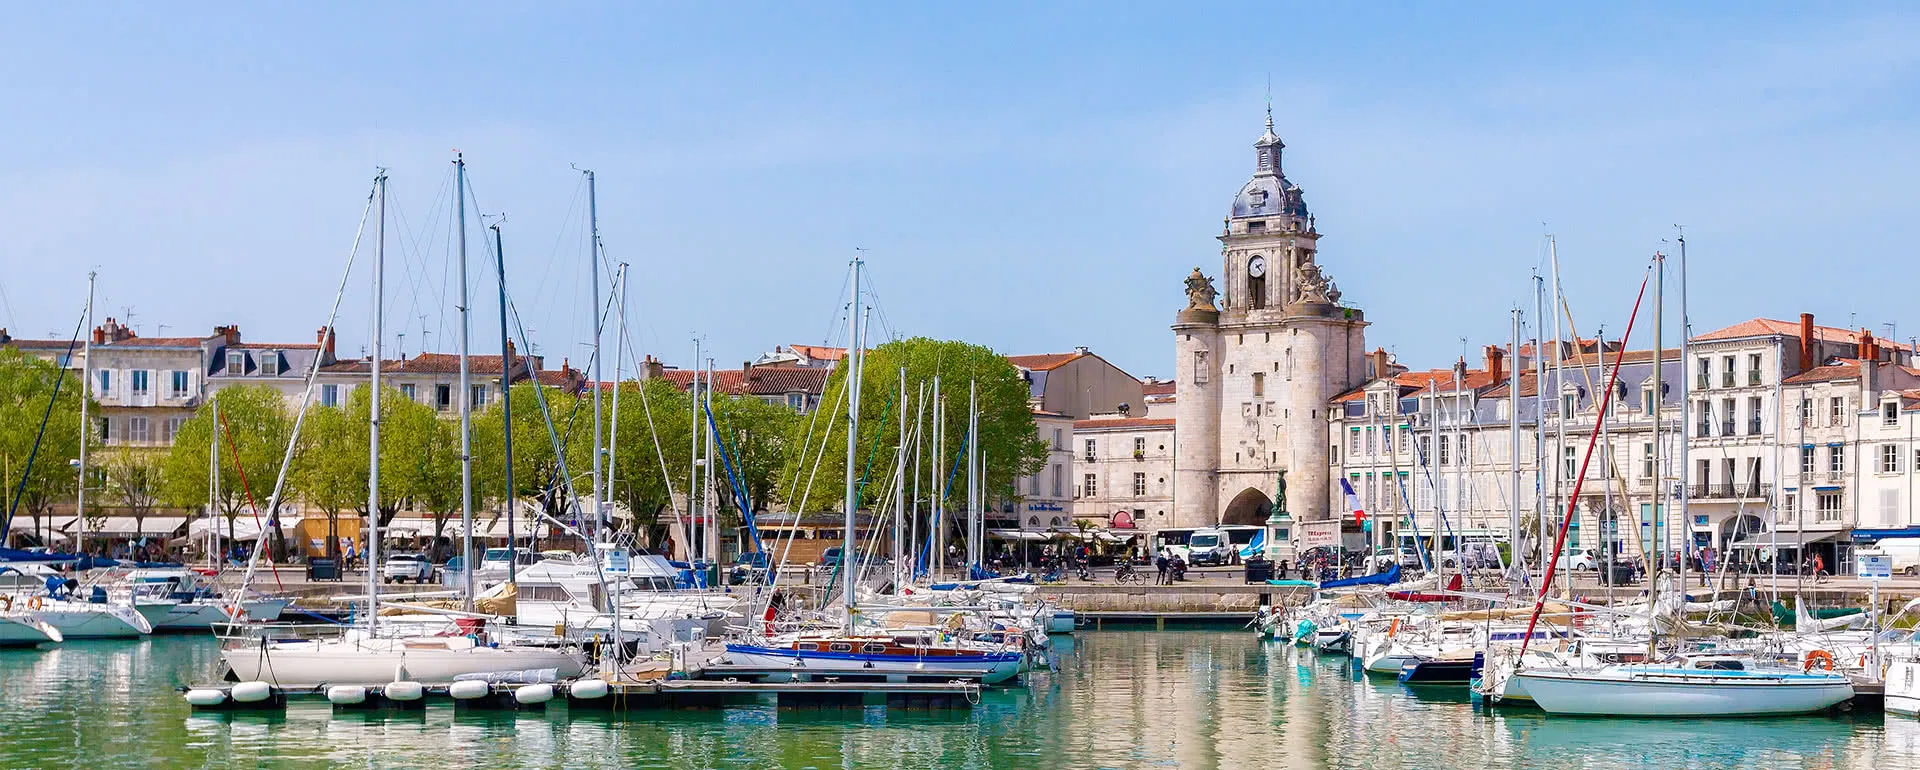 La Rochelle - the destination with youth hostels